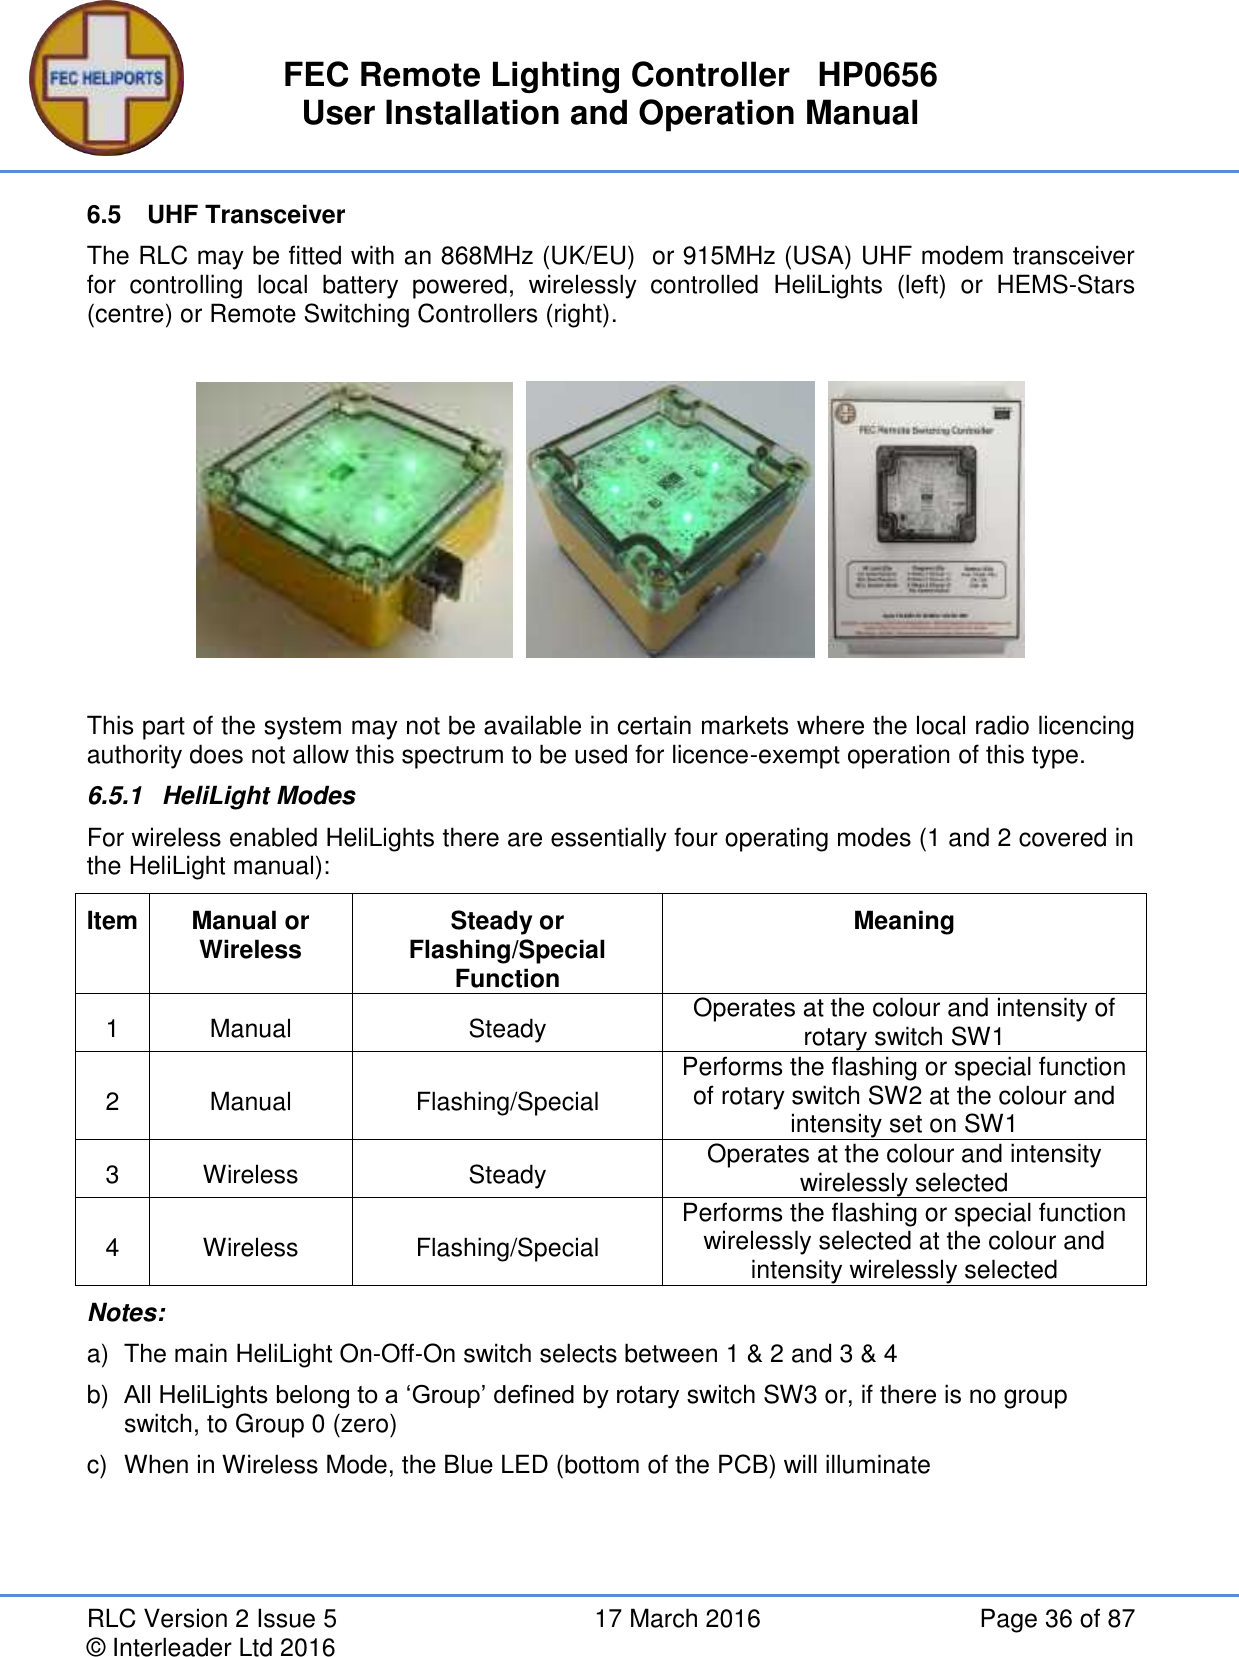 FEC Remote Lighting Controller   HP0656 User Installation and Operation Manual RLC Version 2 Issue 5  17 March 2016  Page 36 of 87 © Interleader Ltd 2016 6.5  UHF Transceiver The RLC may be fitted with an 868MHz (UK/EU)  or 915MHz (USA) UHF modem transceiver for  controlling  local  battery  powered,  wirelessly  controlled  HeliLights  (left)  or  HEMS-Stars (centre) or Remote Switching Controllers (right).          This part of the system may not be available in certain markets where the local radio licencing authority does not allow this spectrum to be used for licence-exempt operation of this type. 6.5.1  HeliLight Modes For wireless enabled HeliLights there are essentially four operating modes (1 and 2 covered in the HeliLight manual): Item Manual or Wireless Steady or Flashing/Special Function Meaning 1 Manual Steady Operates at the colour and intensity of rotary switch SW1 2 Manual Flashing/Special Performs the flashing or special function of rotary switch SW2 at the colour and intensity set on SW1 3 Wireless Steady Operates at the colour and intensity wirelessly selected 4 Wireless Flashing/Special Performs the flashing or special function wirelessly selected at the colour and intensity wirelessly selected Notes: a)  The main HeliLight On-Off-On switch selects between 1 &amp; 2 and 3 &amp; 4 b) All HeliLights belong to a ‘Group’ defined by rotary switch SW3 or, if there is no group switch, to Group 0 (zero) c)  When in Wireless Mode, the Blue LED (bottom of the PCB) will illuminate    